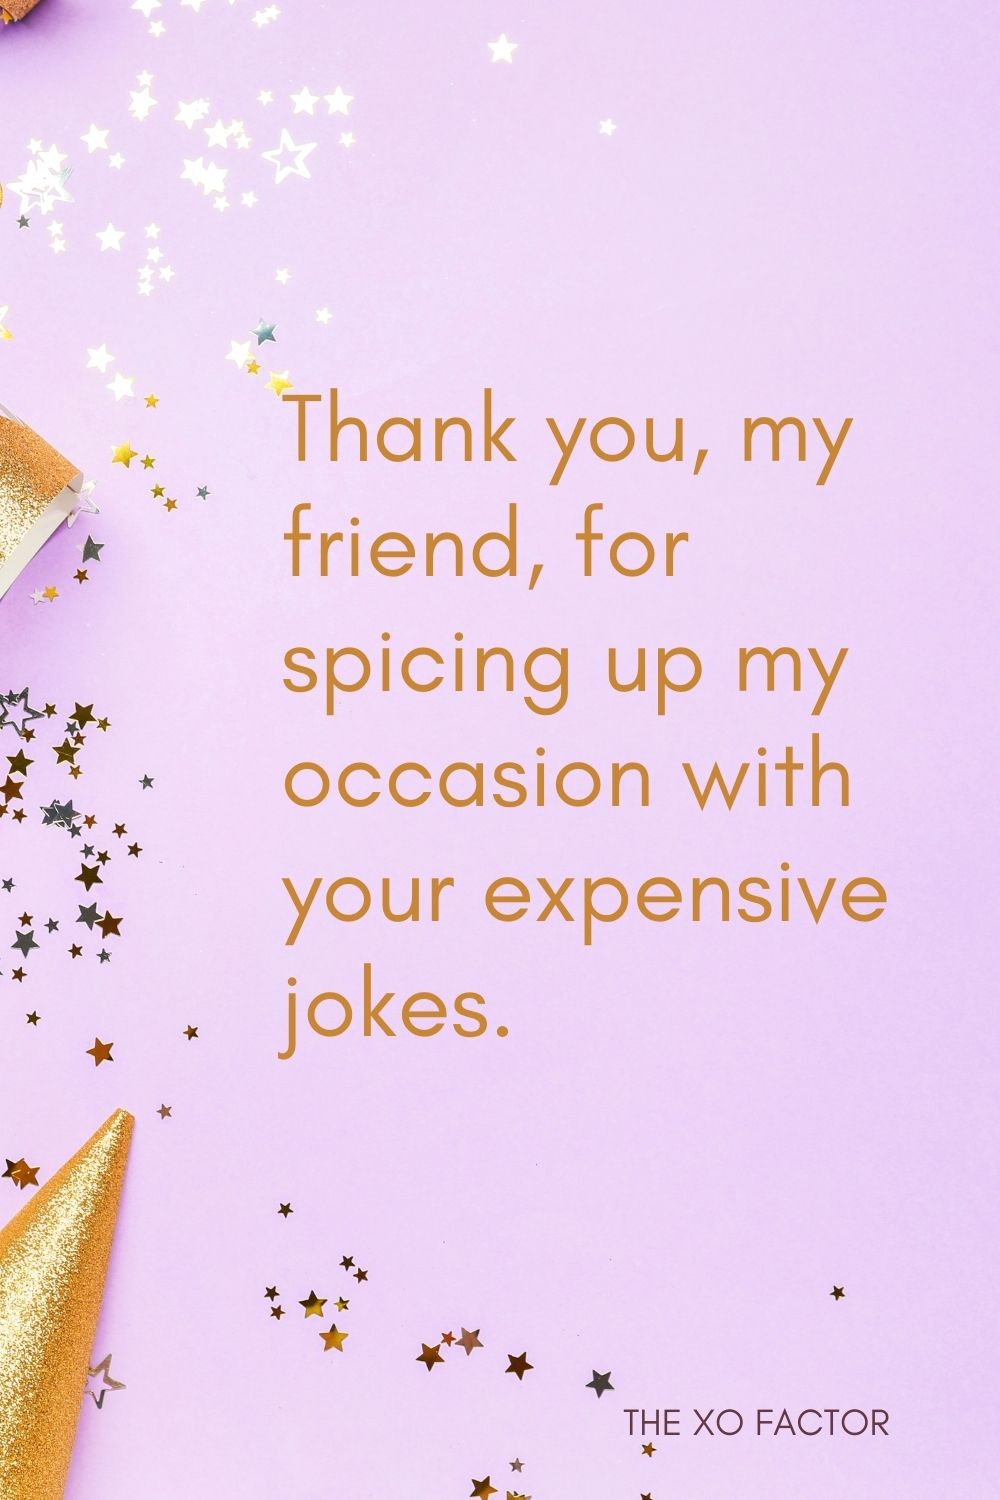 Thank you, my friend, for spicing up my occasion with your expensive jokes.